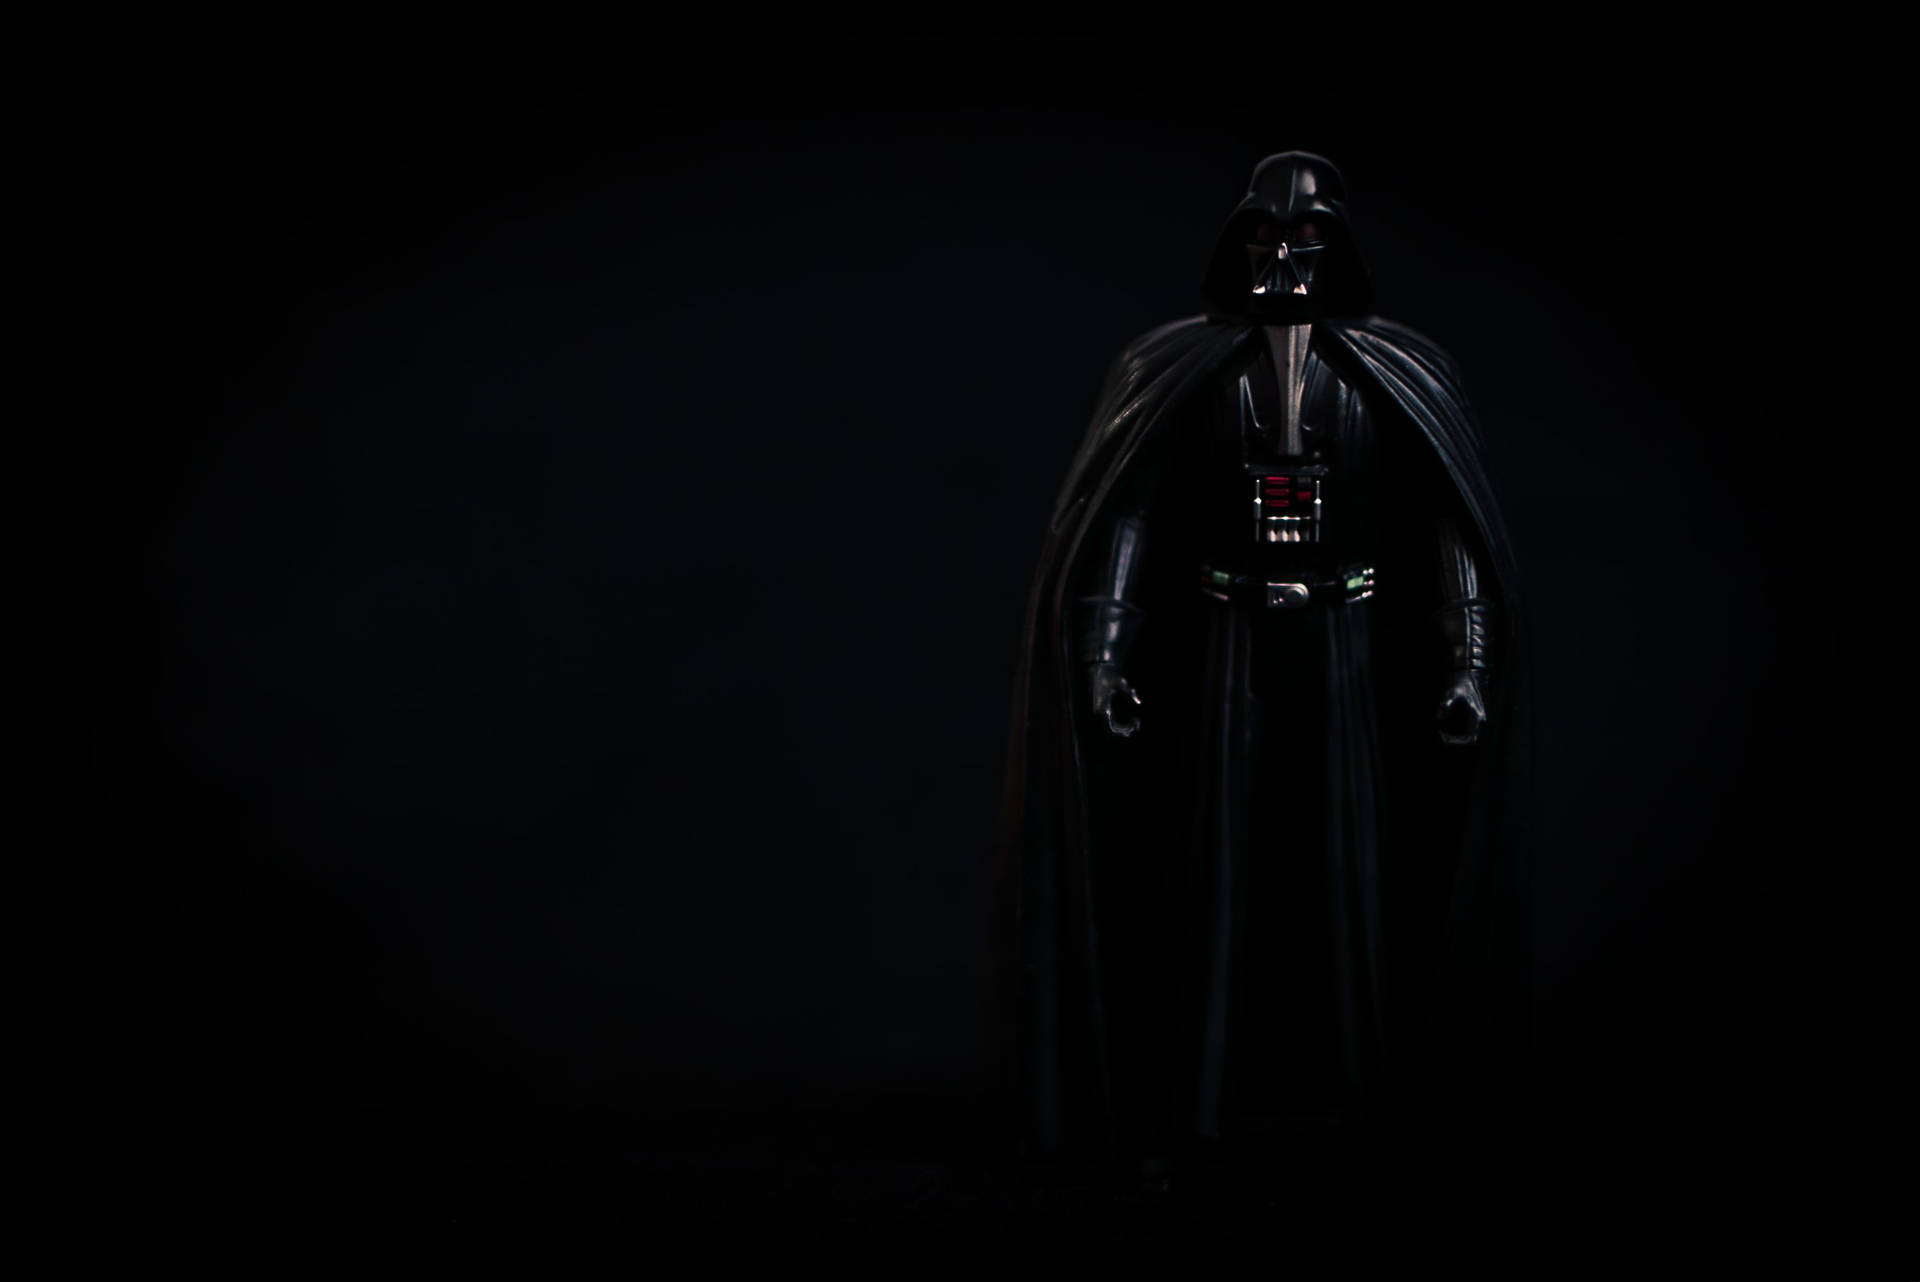 Sith Lord Darth Vader Looms In The Darkness Background